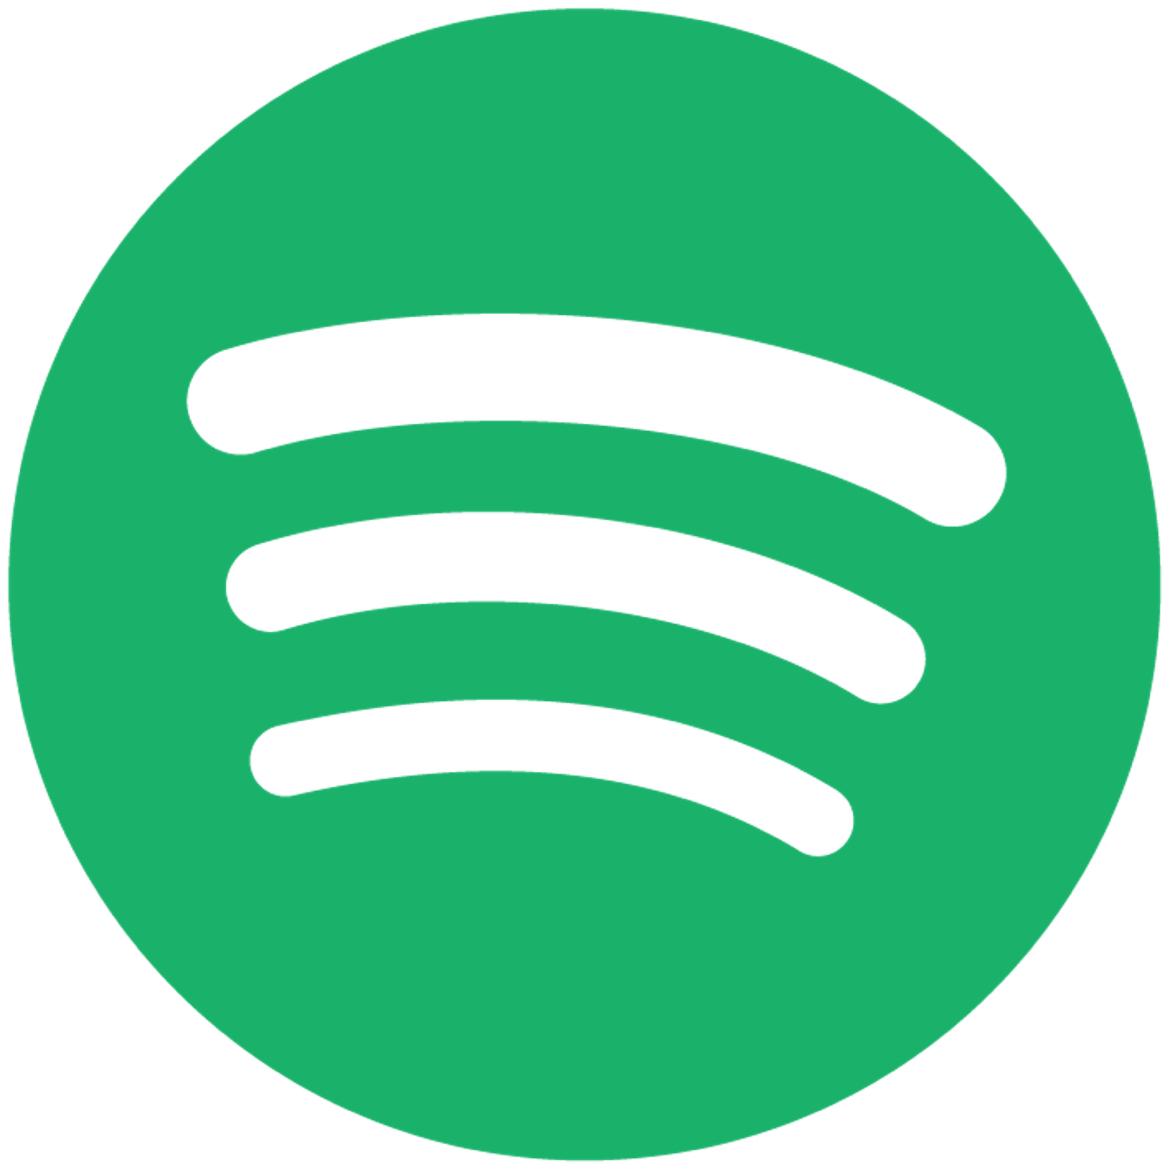 Spotify's images